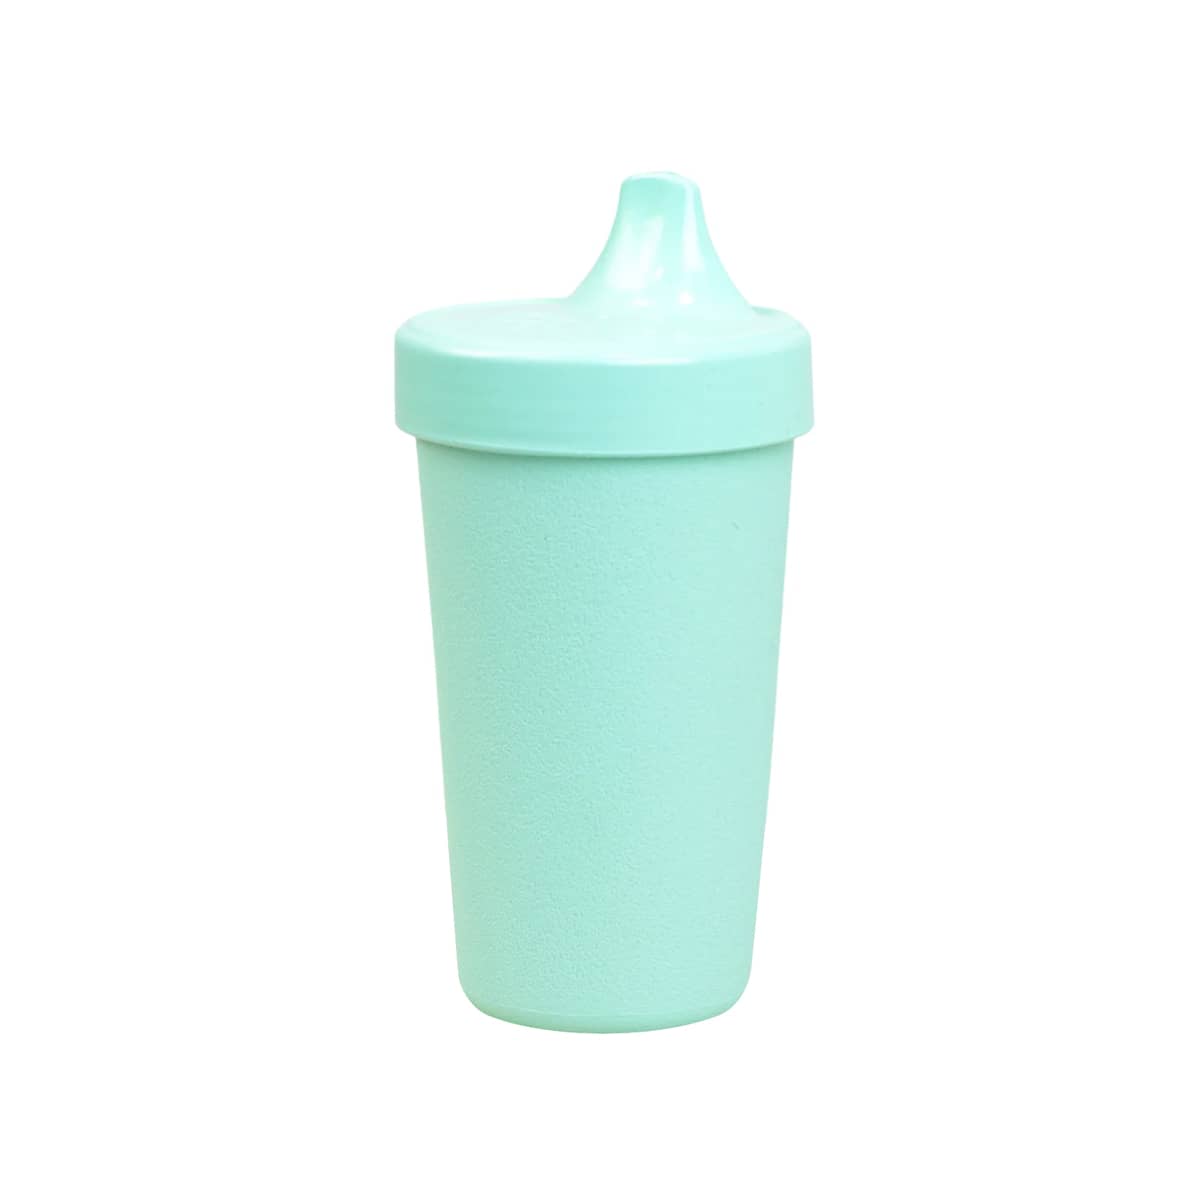 Re-Play Recycled No-Spill Sippy Cup - Mint